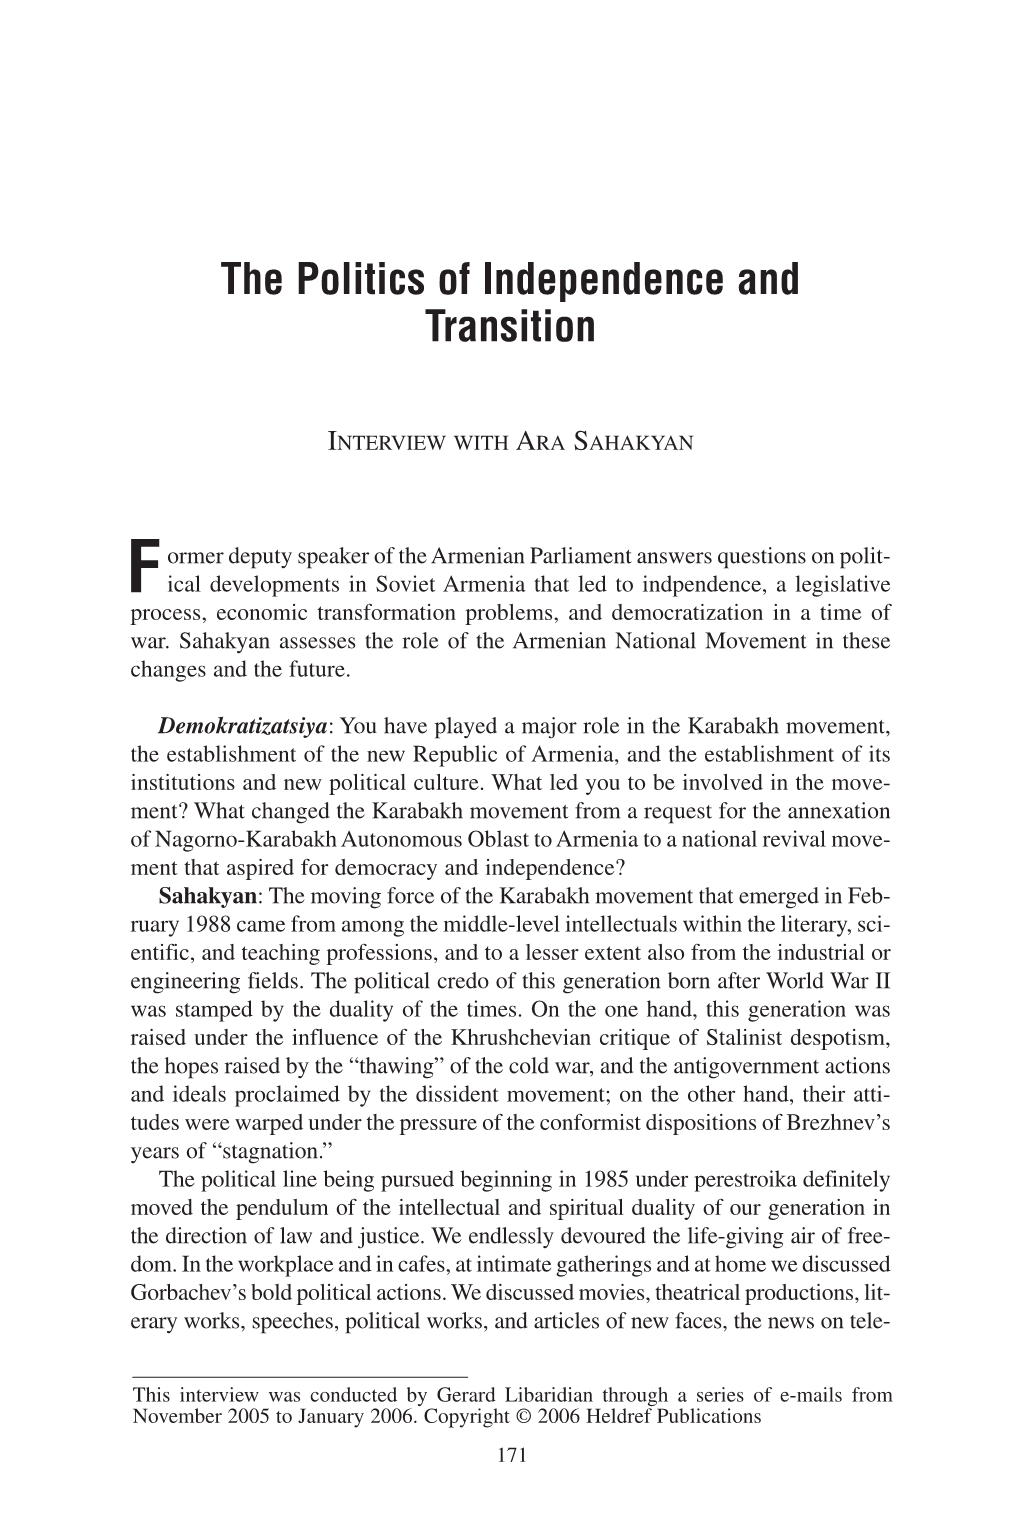 The Politics of Independence and Transition